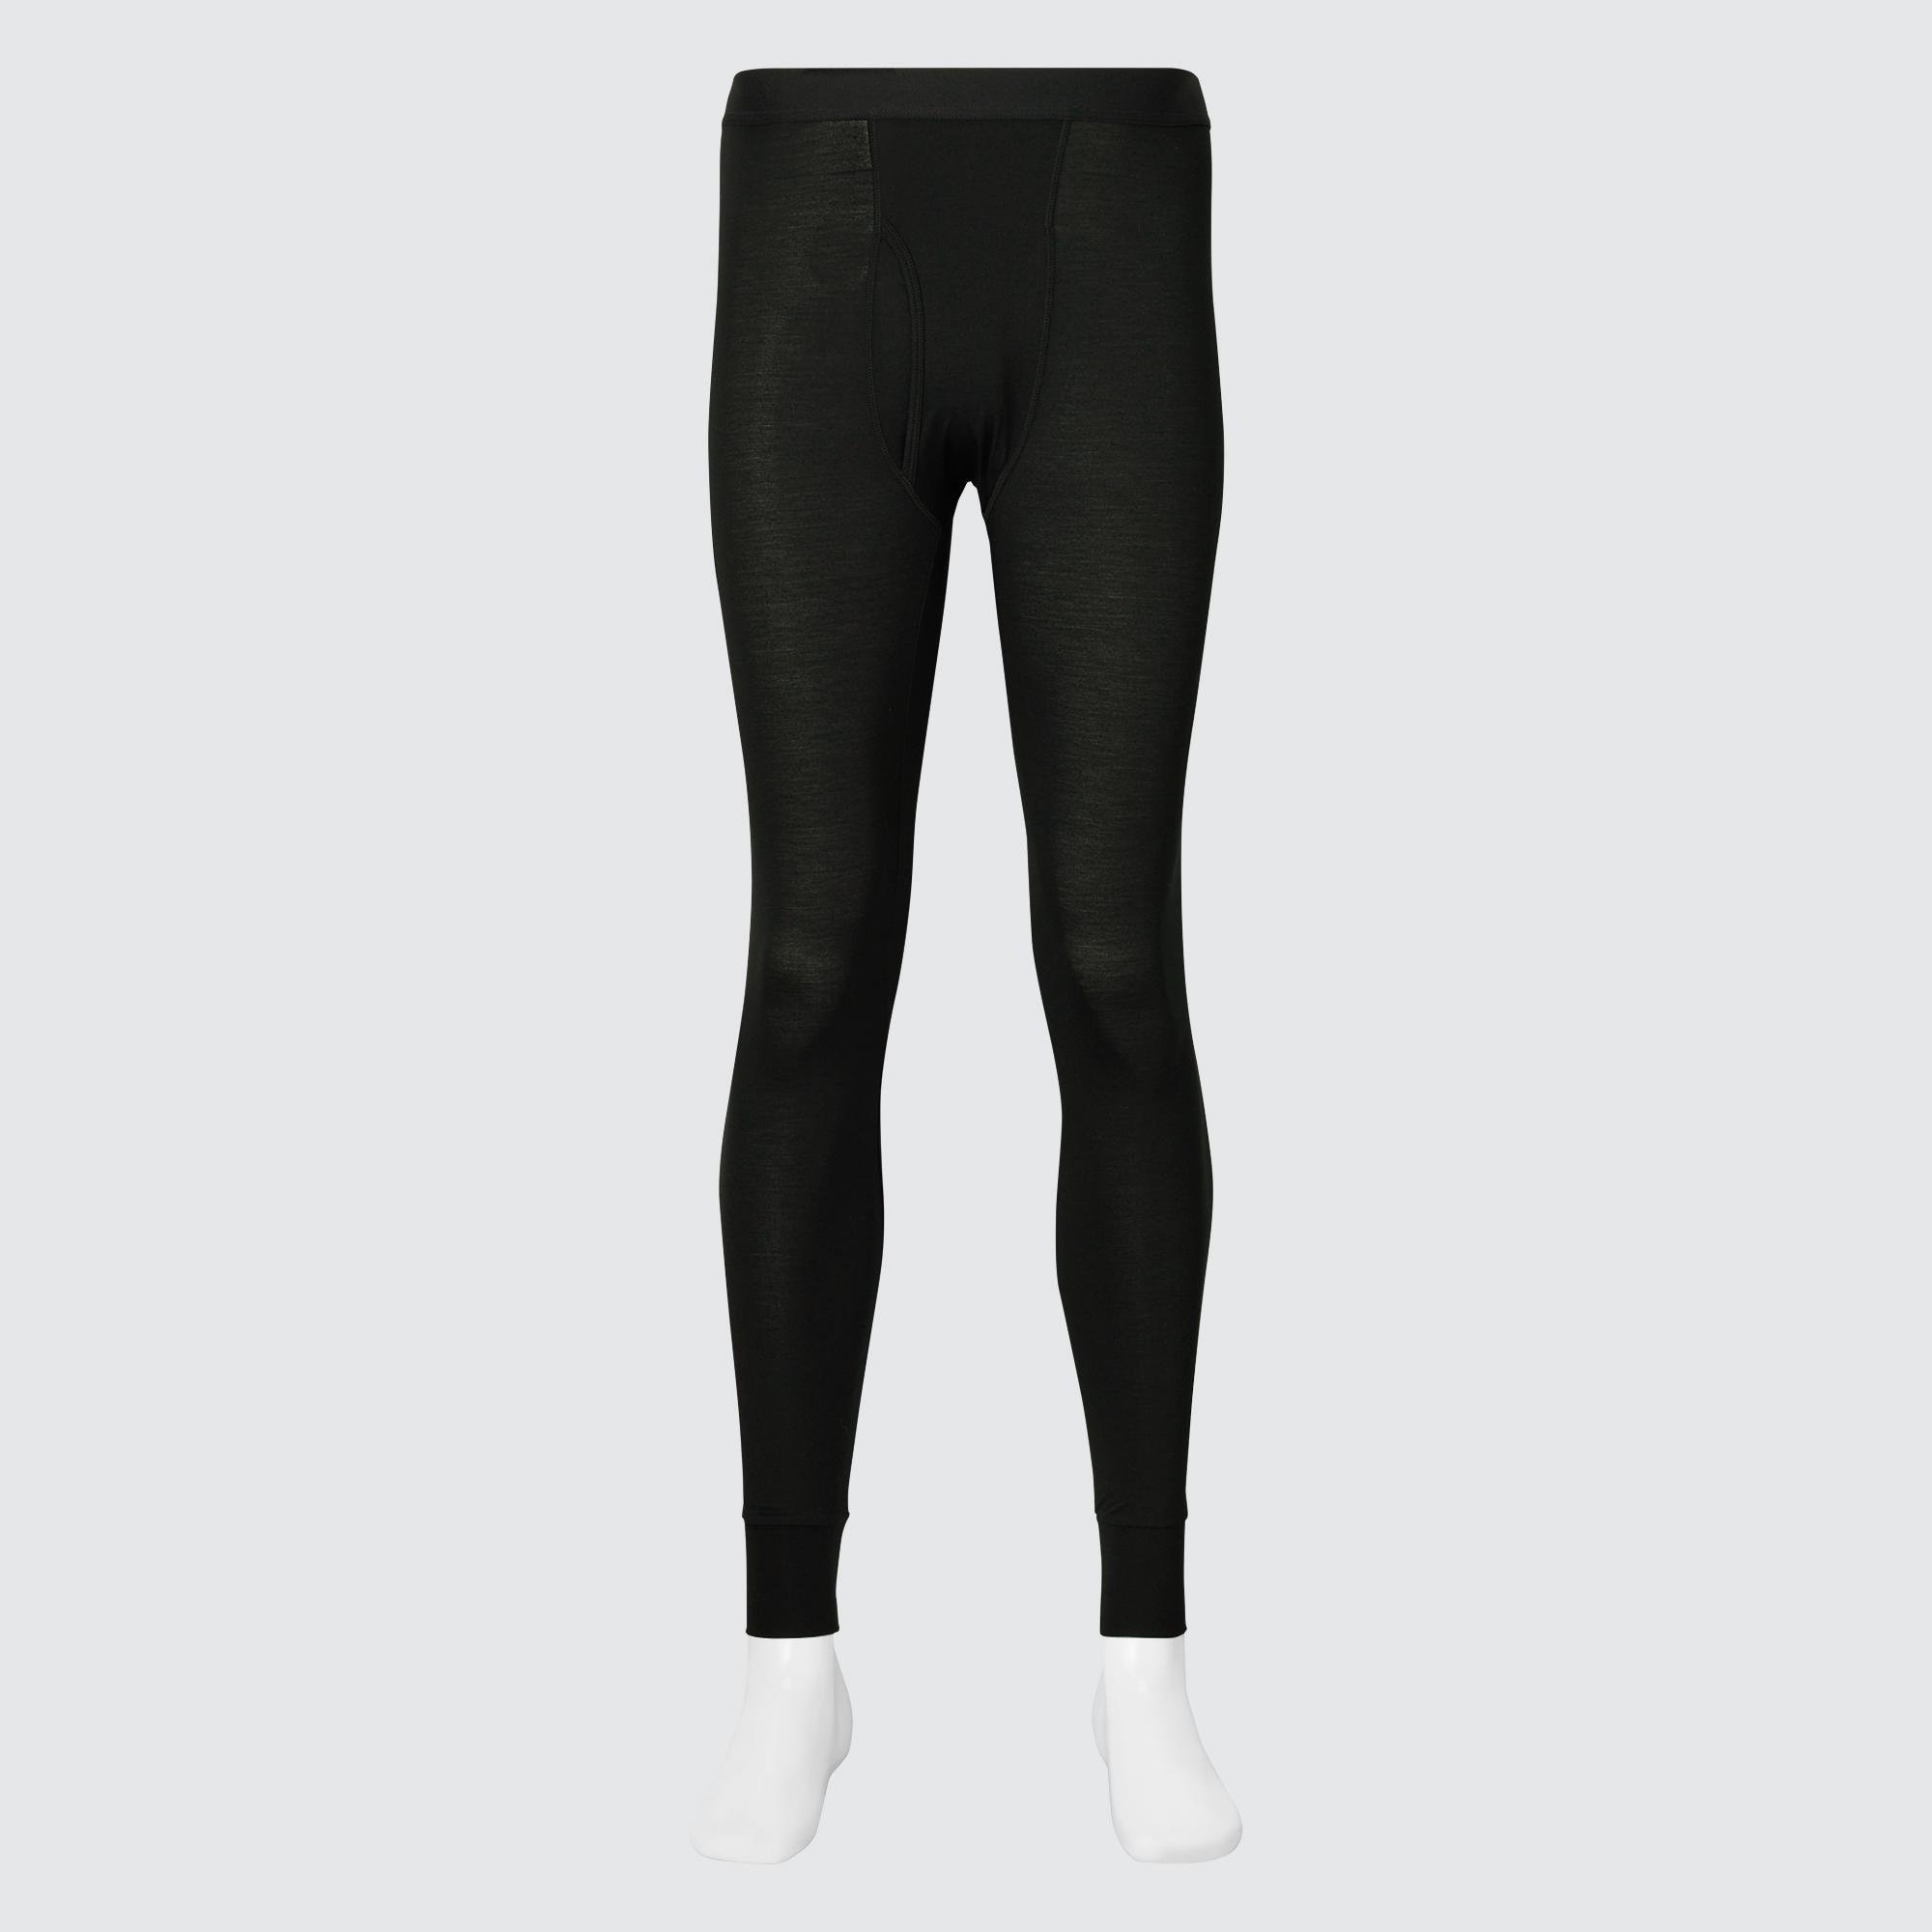 HEATTECH Tights by UNIQLO